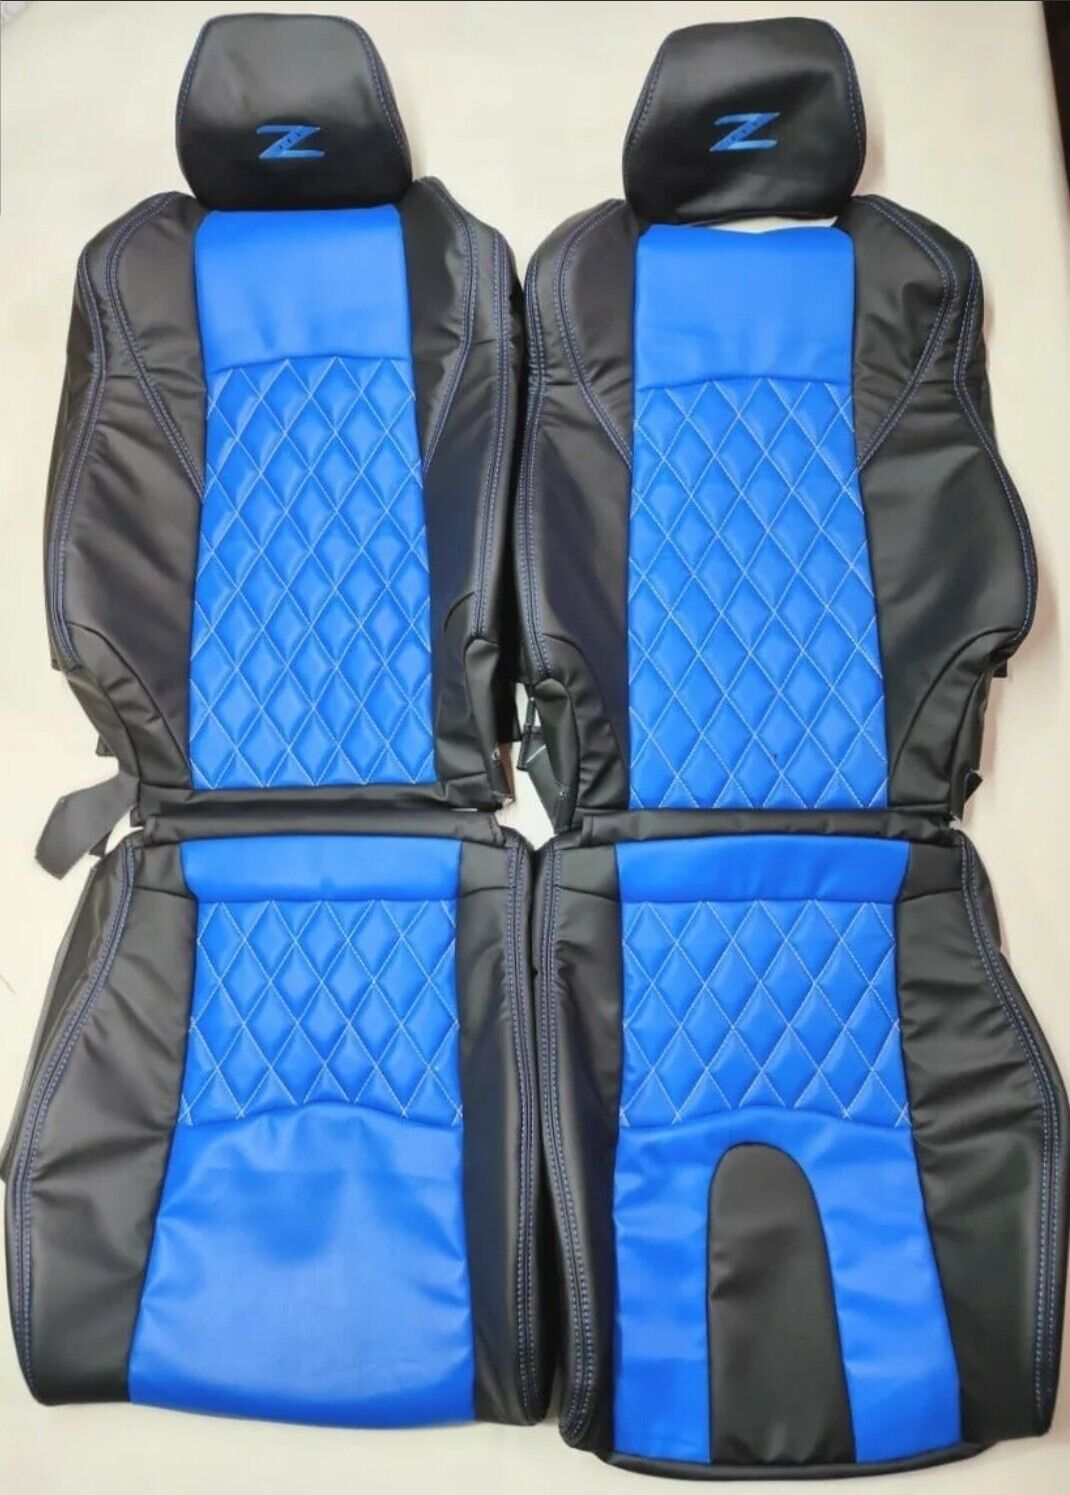 Fits For Nissan 350Z Sports Seat Covers In Black & Blue Color (2003-2008) 